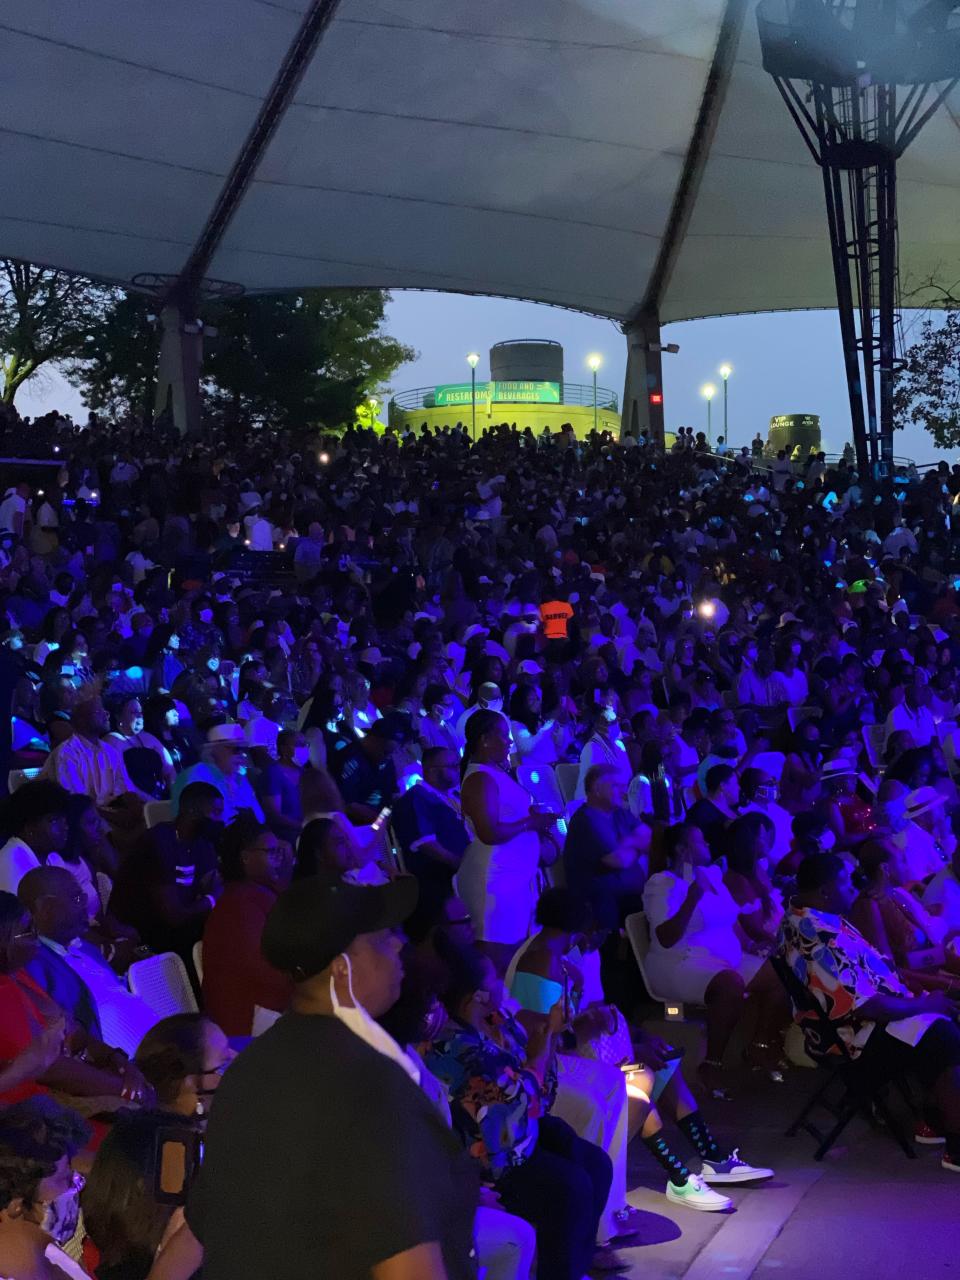 A concert crowd at Aretha Franklin Amphitheater in Detroit, Michigan, on Saturday, Aug. 21, 2021.